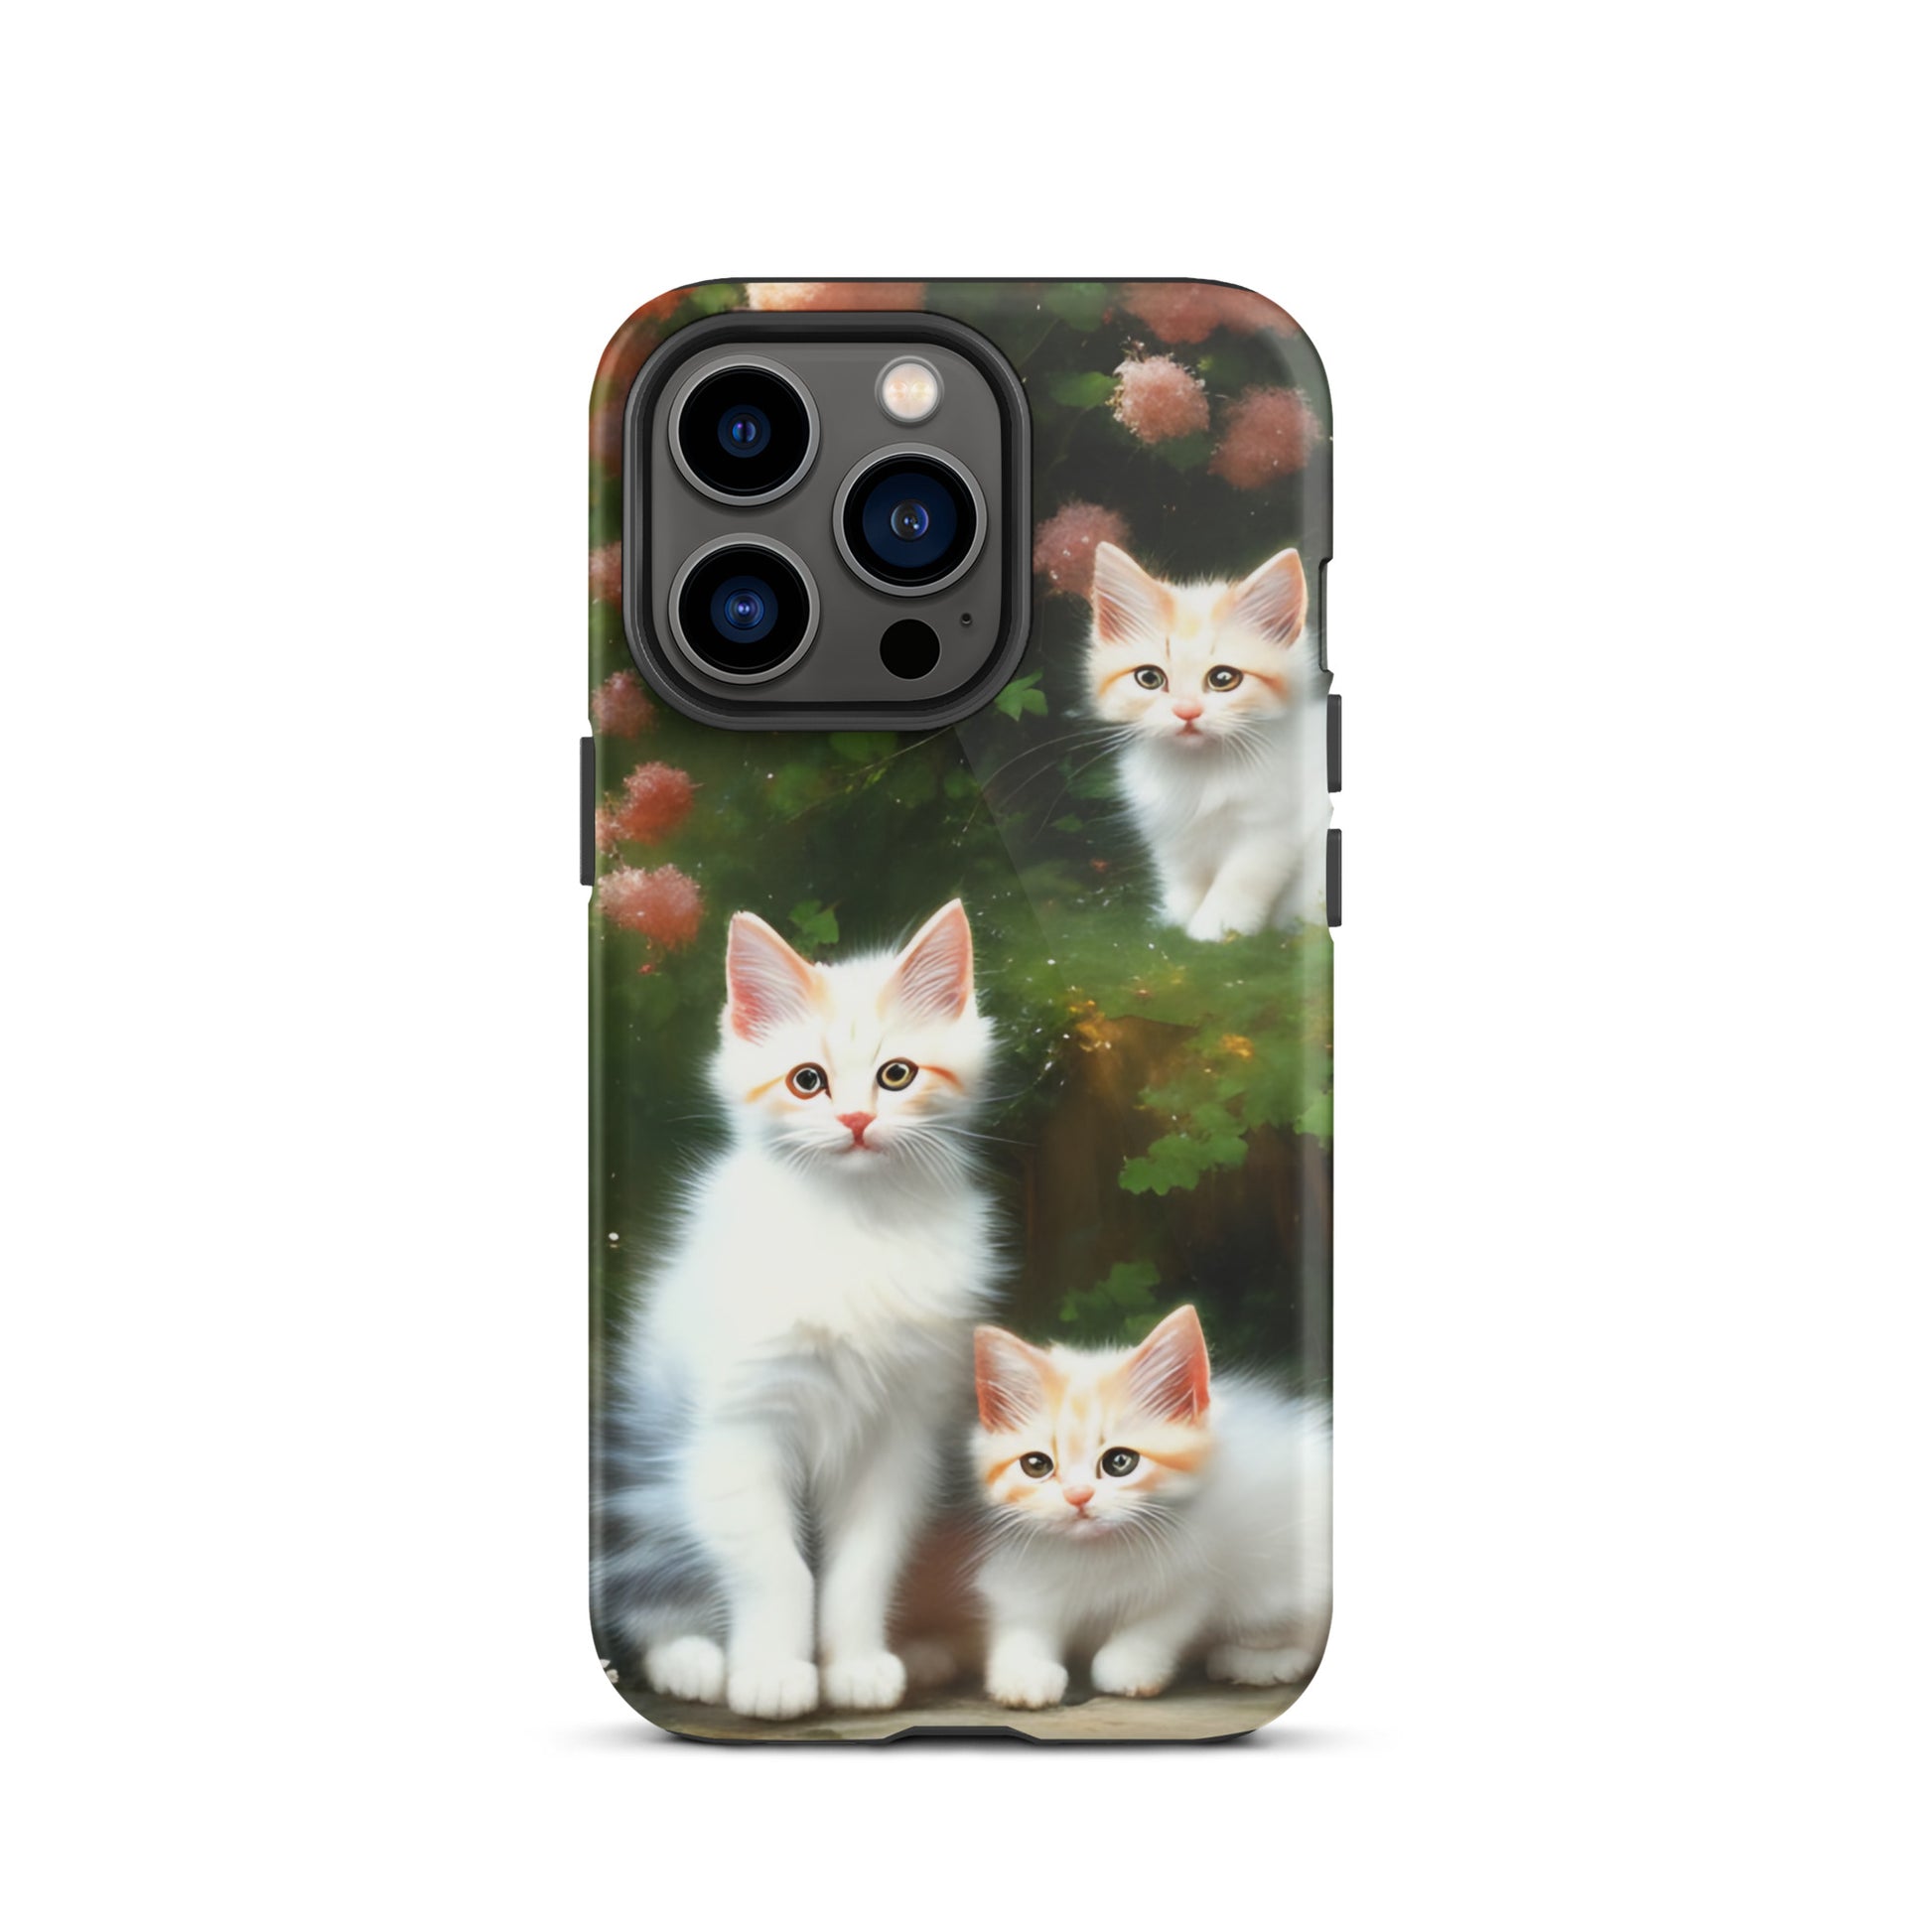 A picture of a iphone tough case with 3 fluffy white and orange kittens and peach colored flowers in the background - glossy-iphone-13-pro-front